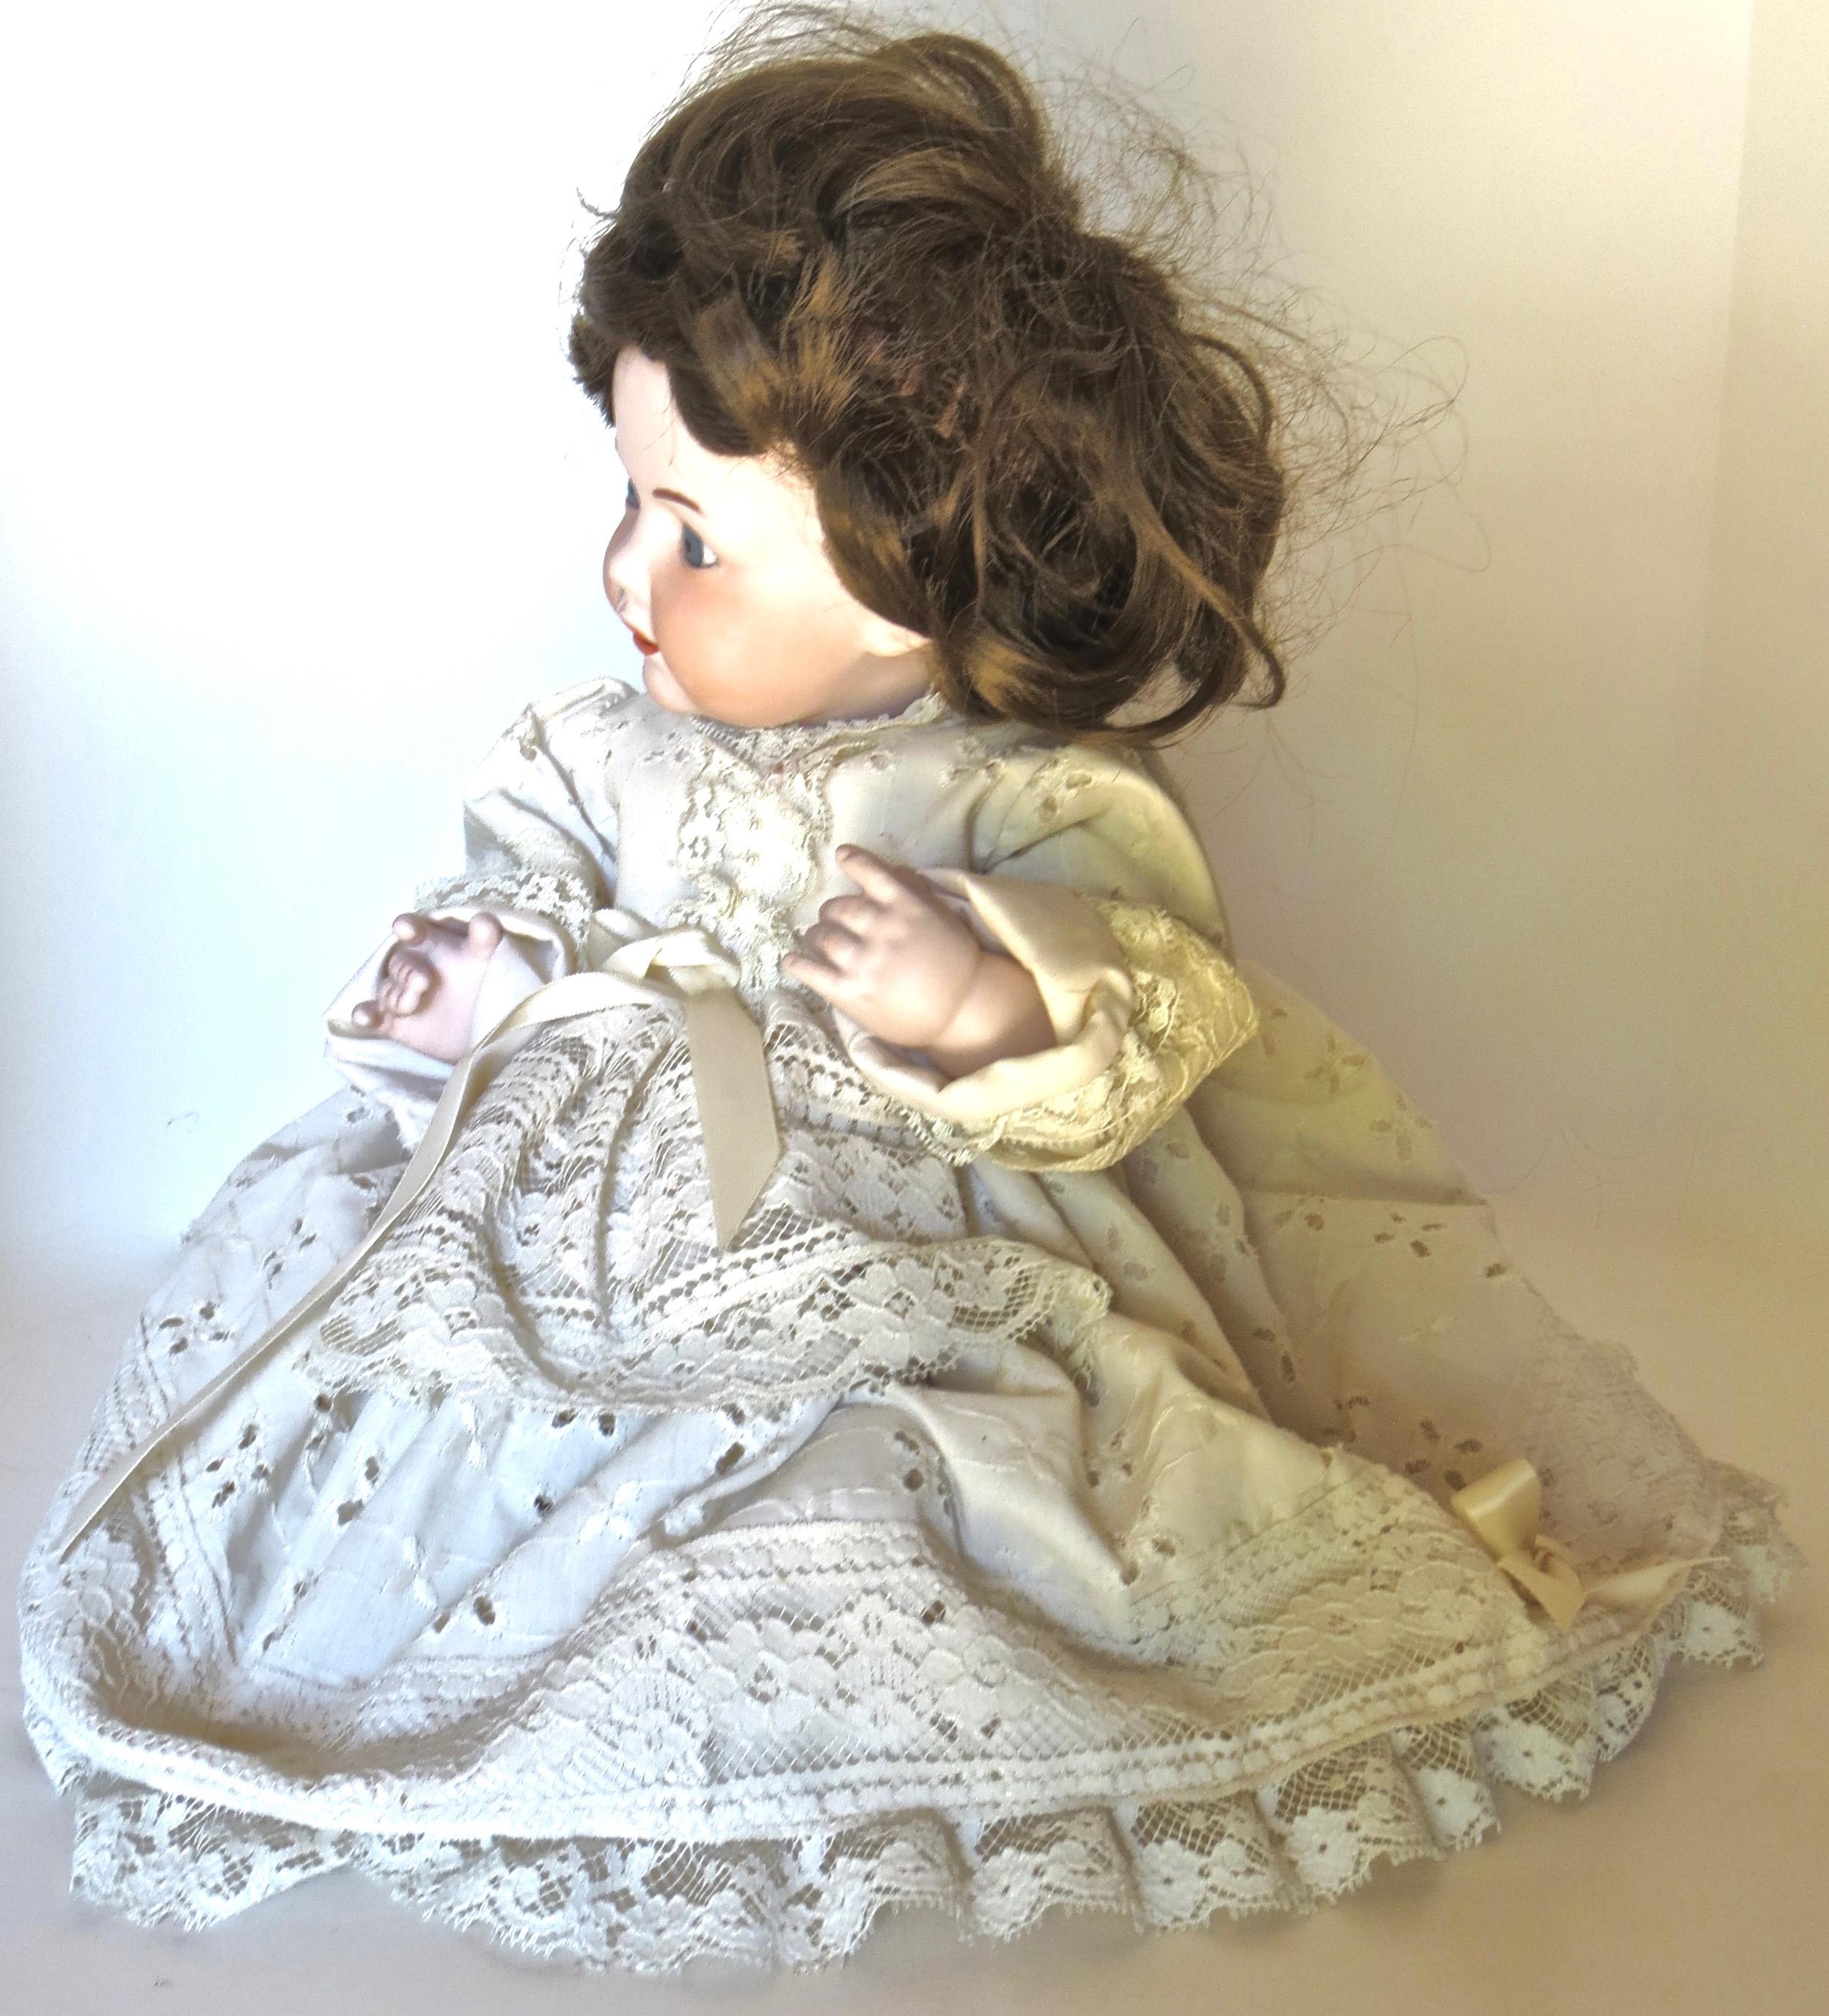 This is a reproduction doll made circa 1980 of a doll made in the late 19th century by Kestner 